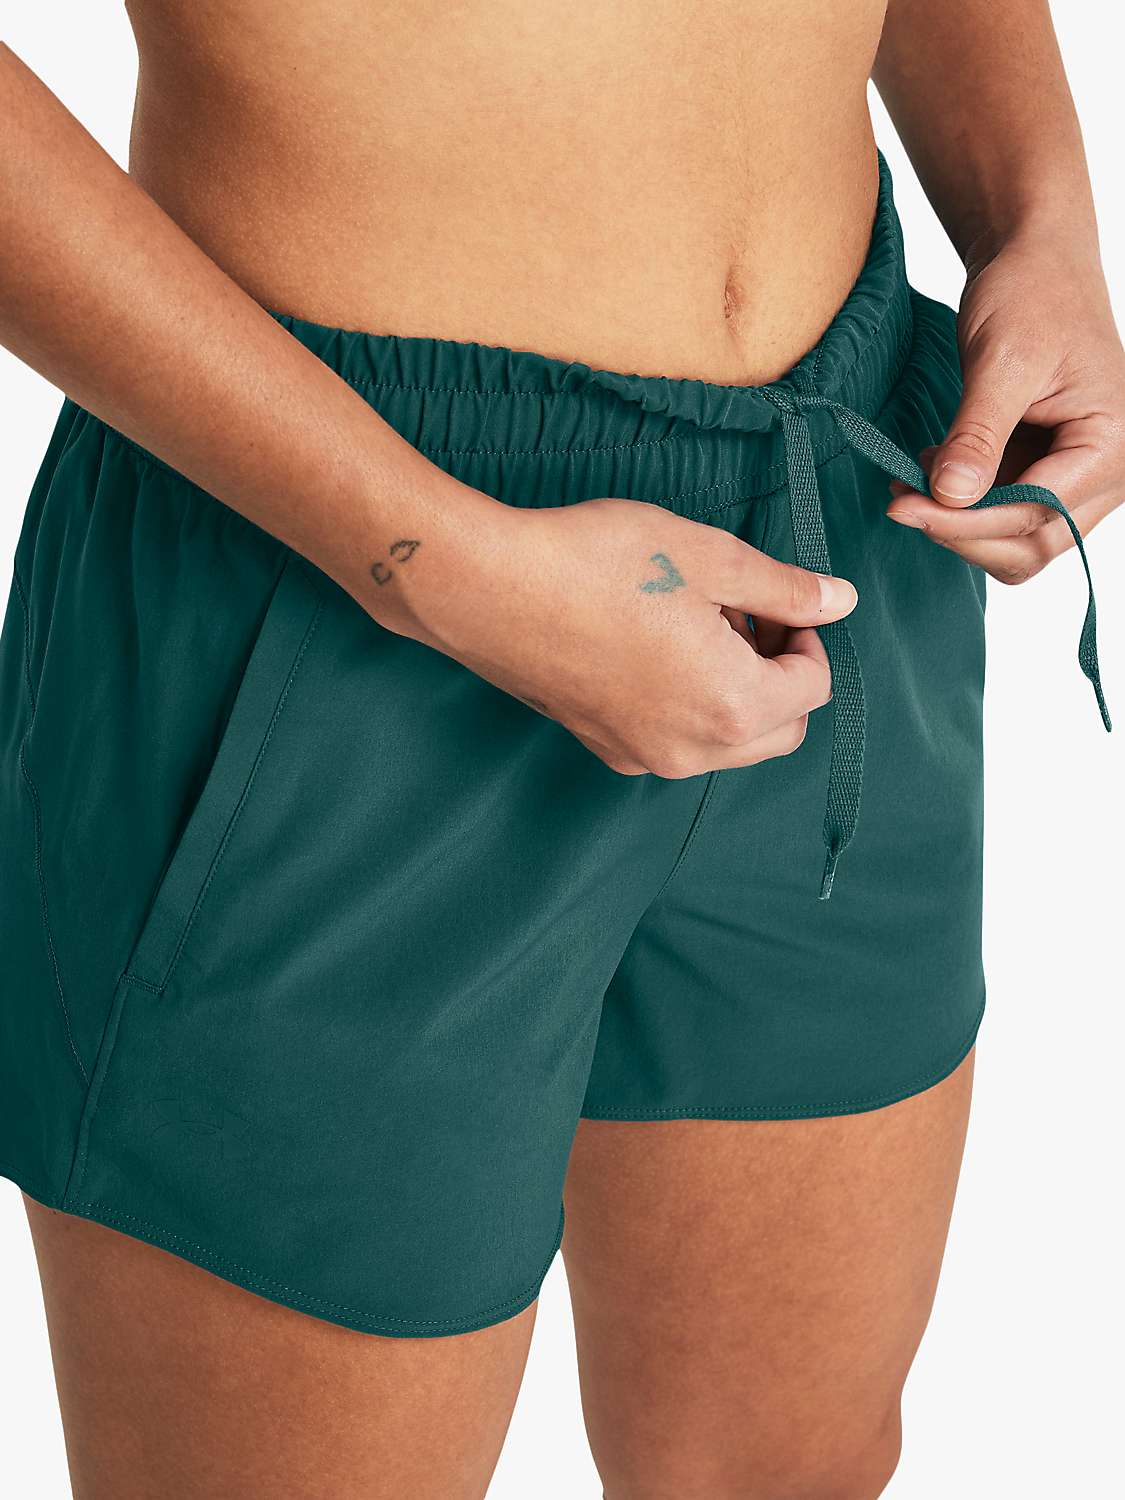 Buy Under Armour Flex Woven 3" Running Shorts, Hydro Teal Online at johnlewis.com